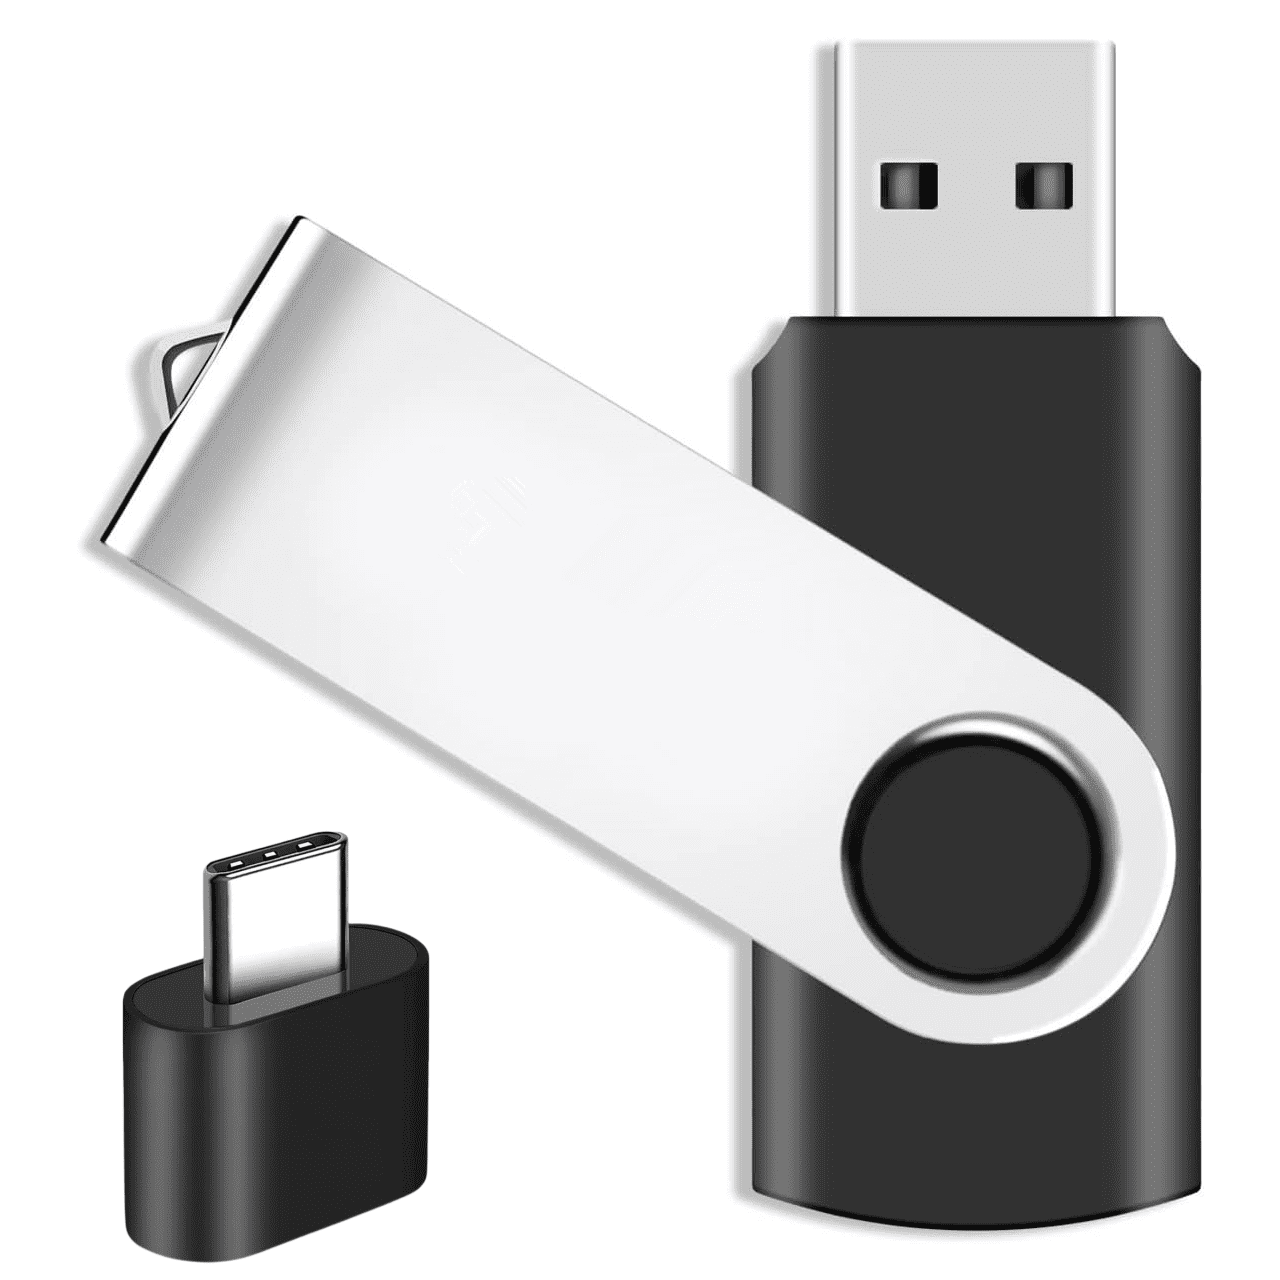 onn. USB 2.0 Flash Drive for Tablets and Computers, 128 GB Capacity 